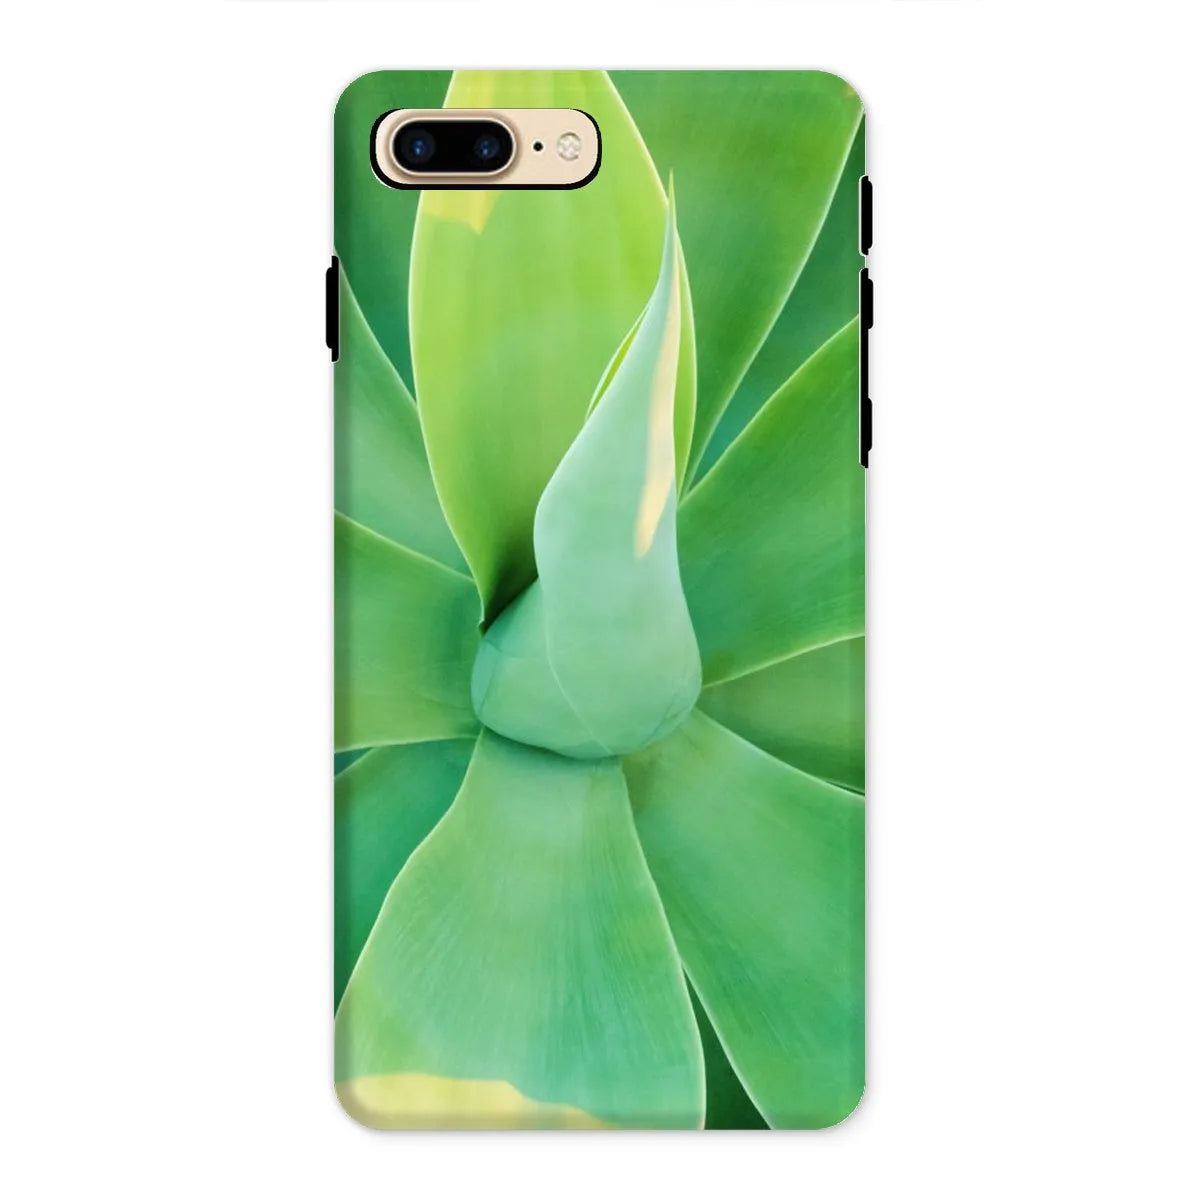 In Bloom Too Tough Phone Case - Iphone 8 Plus / Matte - Mobile Phone Cases - Aesthetic Art